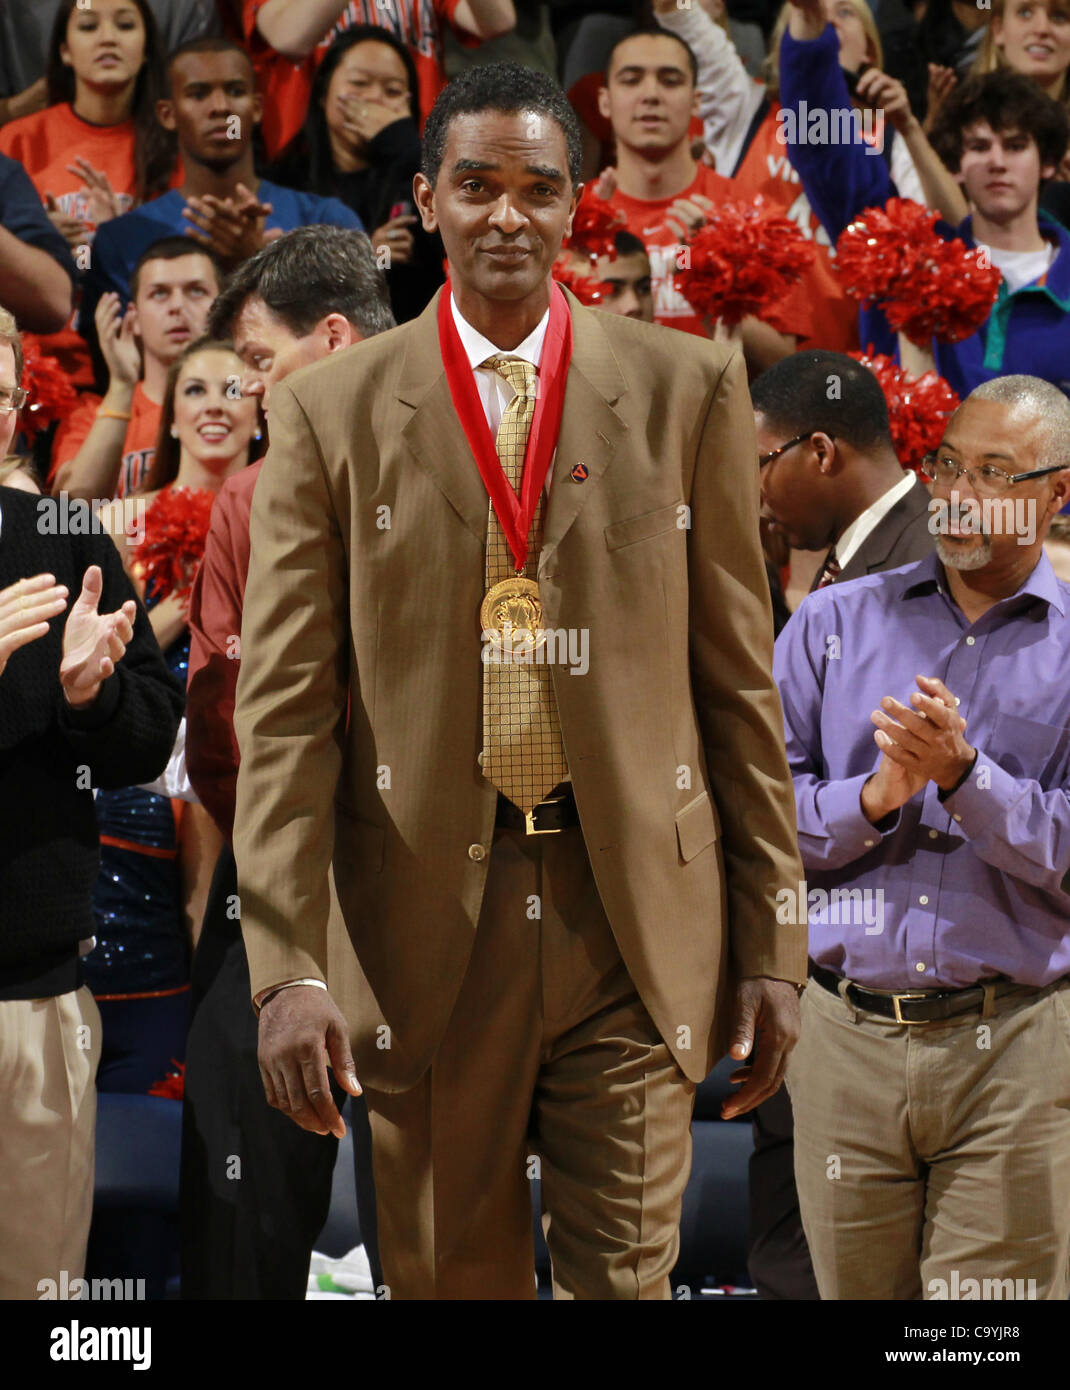 Jan. 5, 2012 - Charlottesville, Virginia, United States - Virginia Cavalier alumni Ralph Sampson makes an appearance after being inducted into the basketball Hall of Fame during the game on November 29, 2011 at the John Paul Jones Arena in Charlottesville, Virginia. Virginia defeated Michigan 70-58. Stock Photo